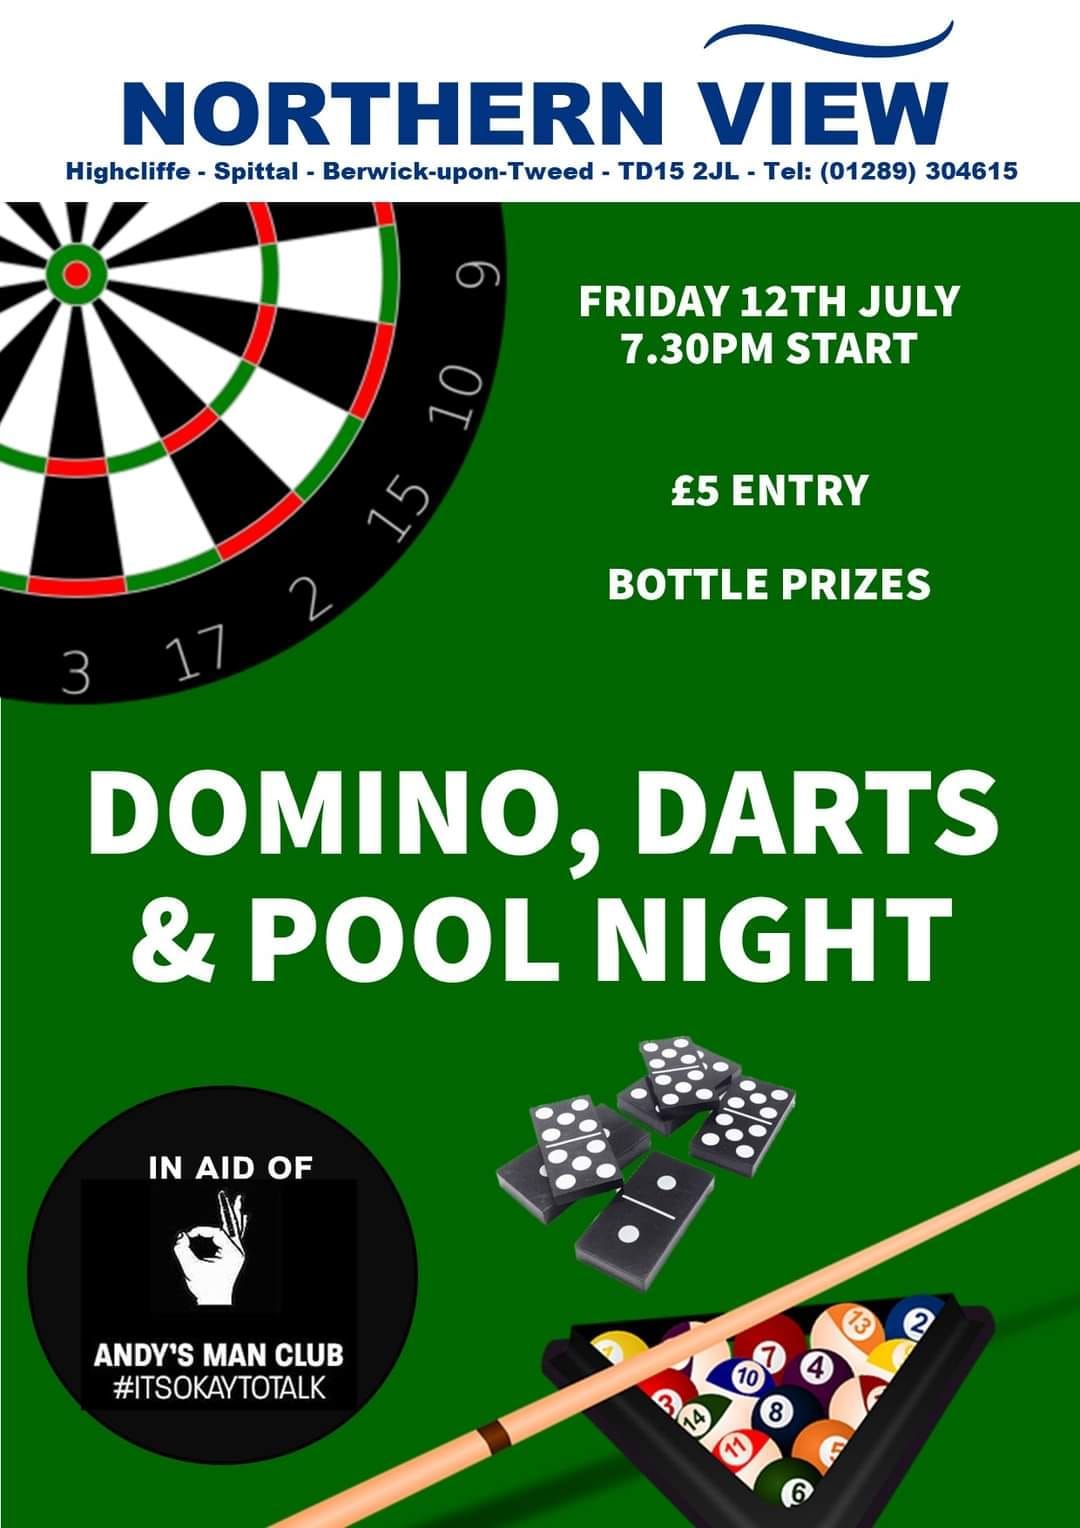 Domino, Darts and Pool in aid of Andy's Man Club